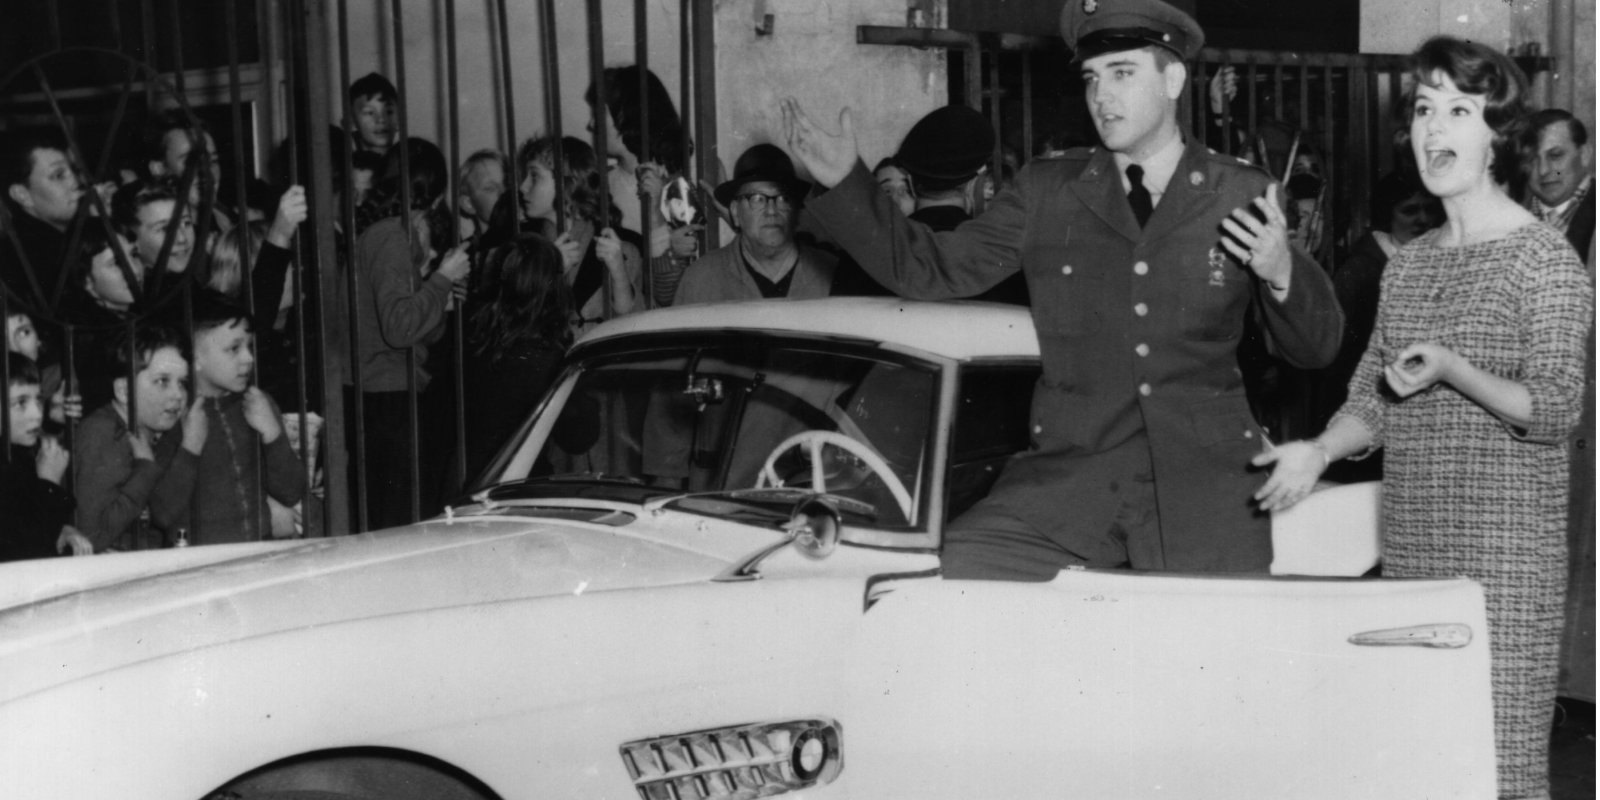 Elvis Presley poses in Germany with a white BMW.